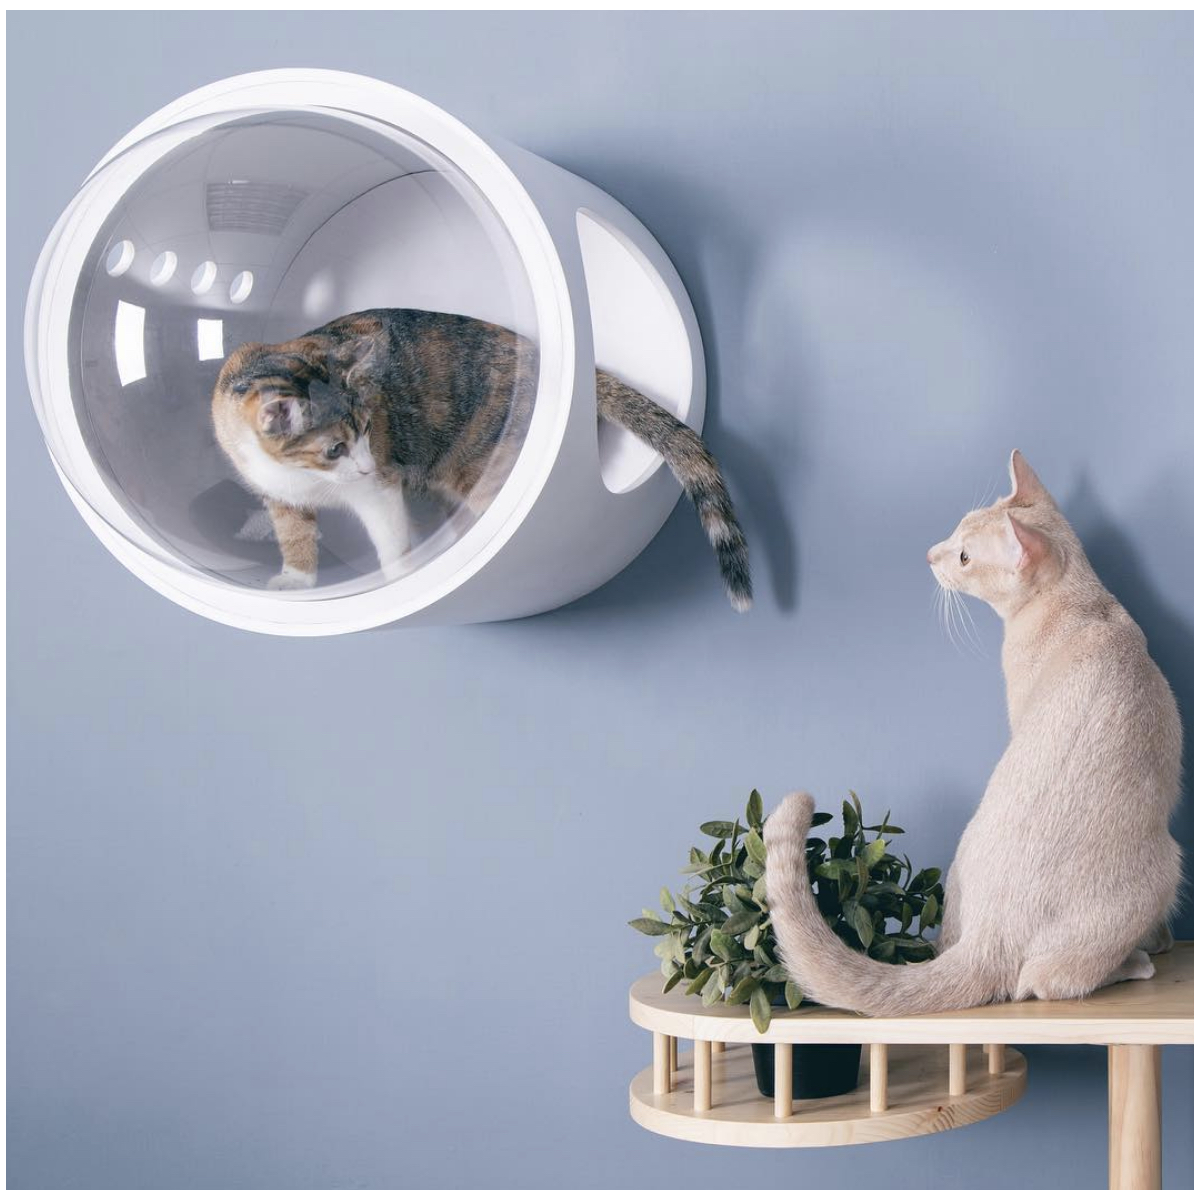 Spaceship Gamma Ultra Modern Cat Bed or Wall Mounted Bed ...